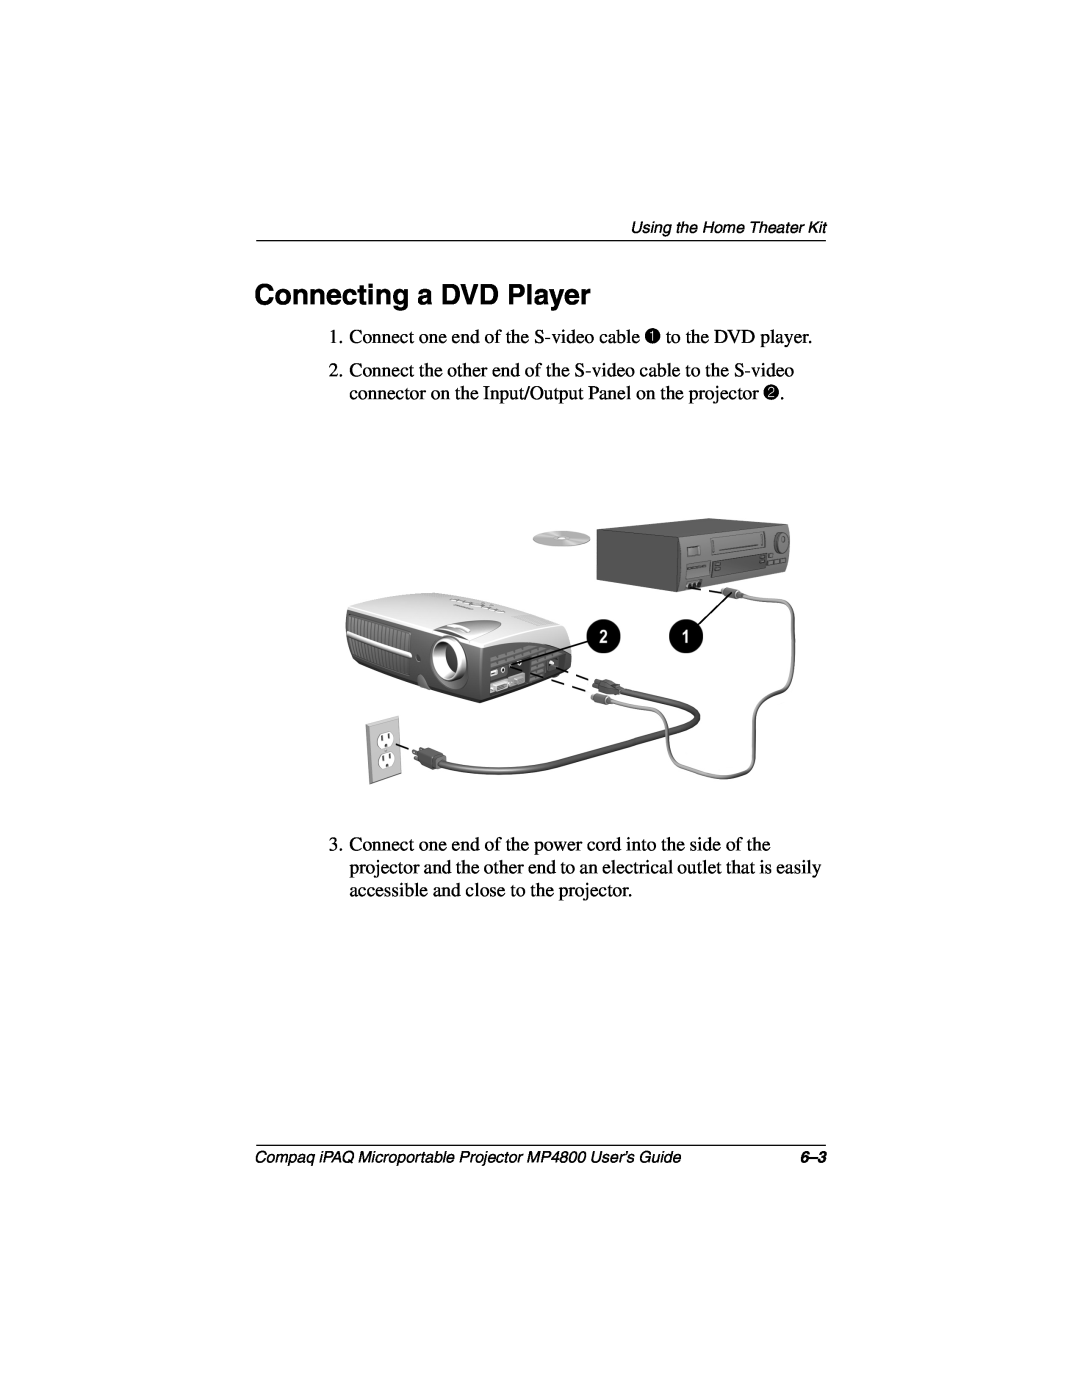 Compaq MP4800 manual Connecting a DVD Player 